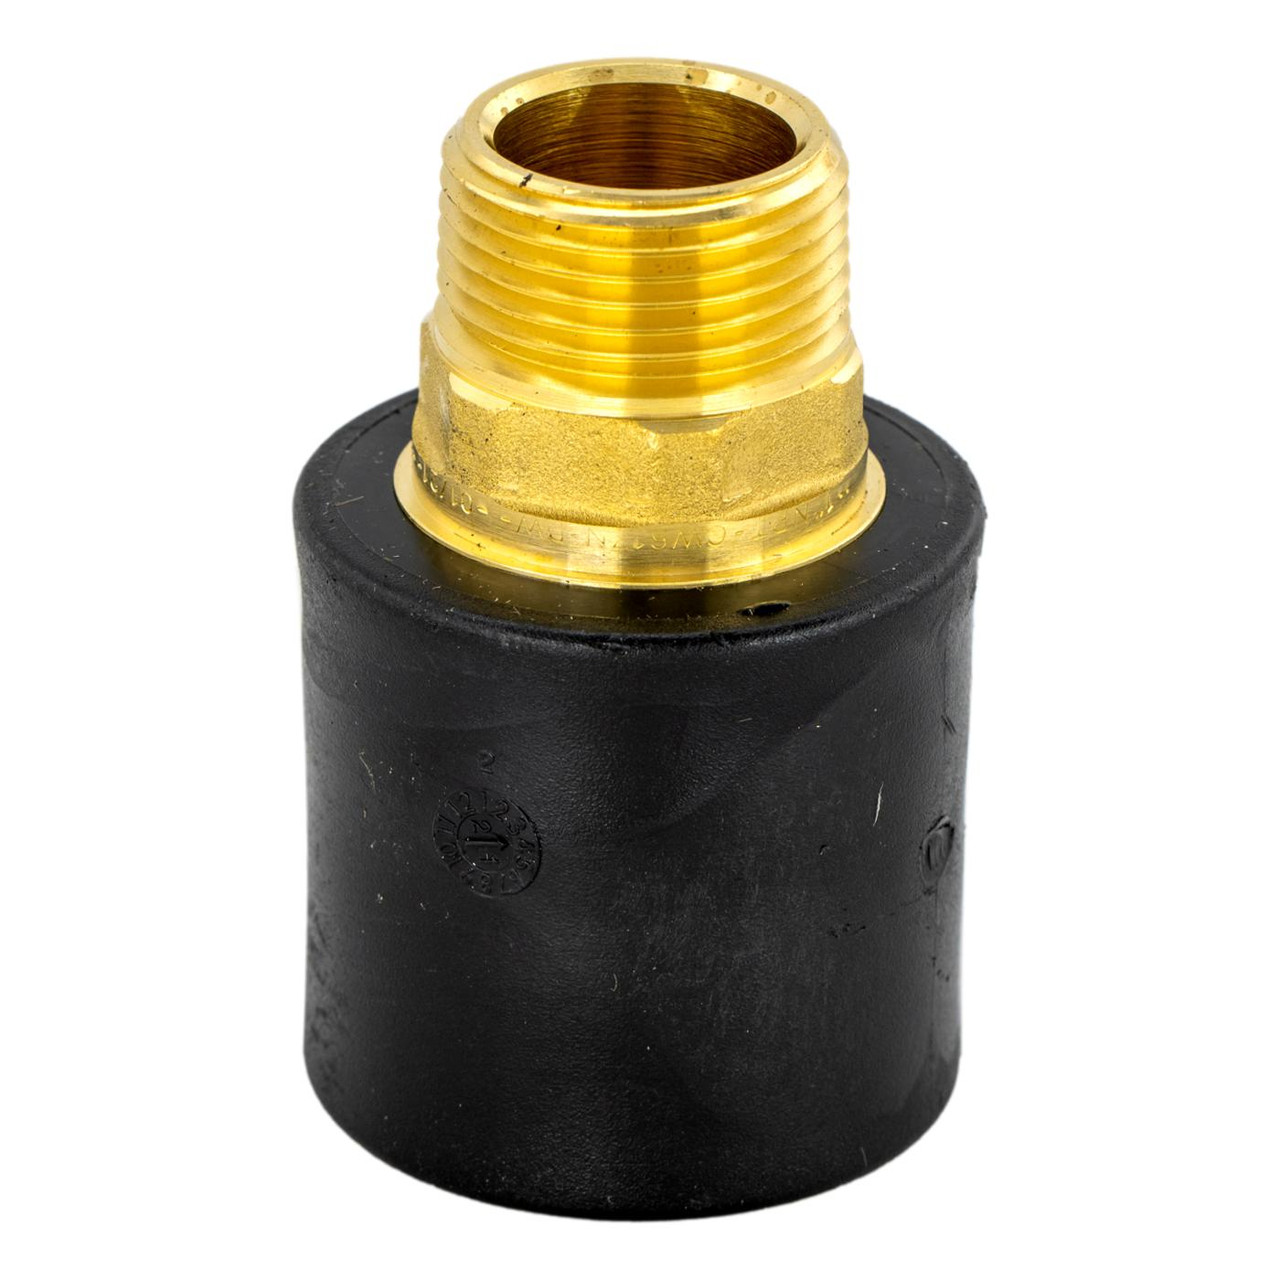 Brass Adapter - 1¼ Fusion x 1 Male Pipe Thread